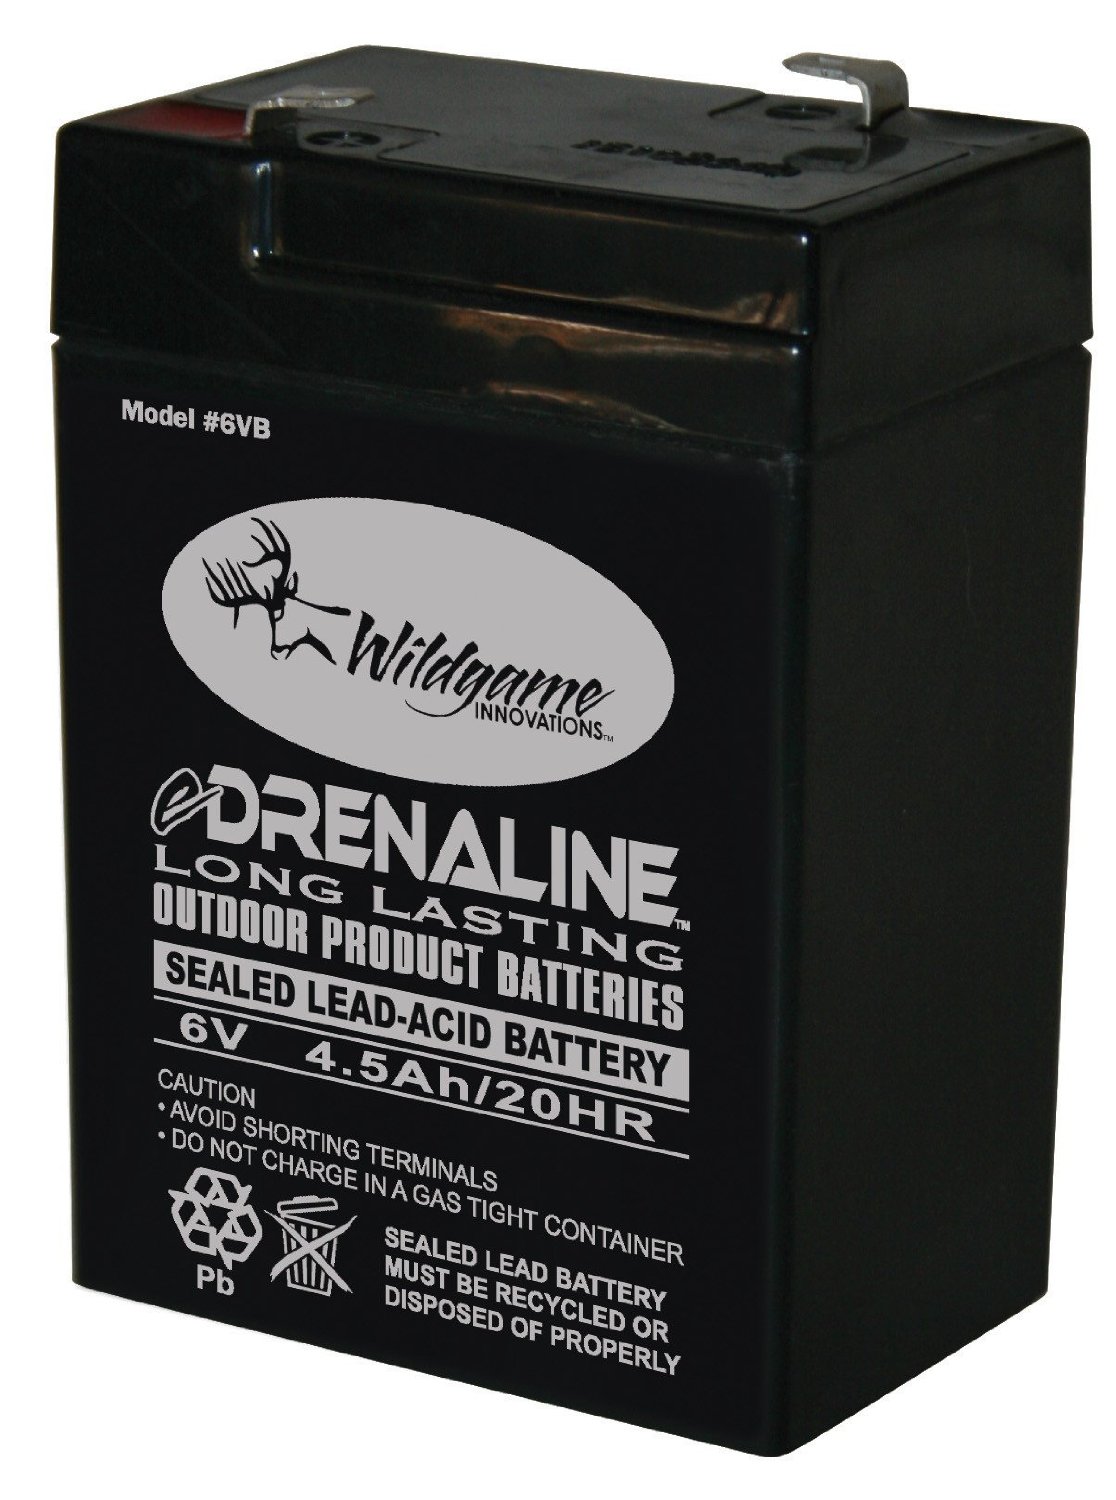 6-Volt eDRENALINE Tab Style Rechargeable Battery